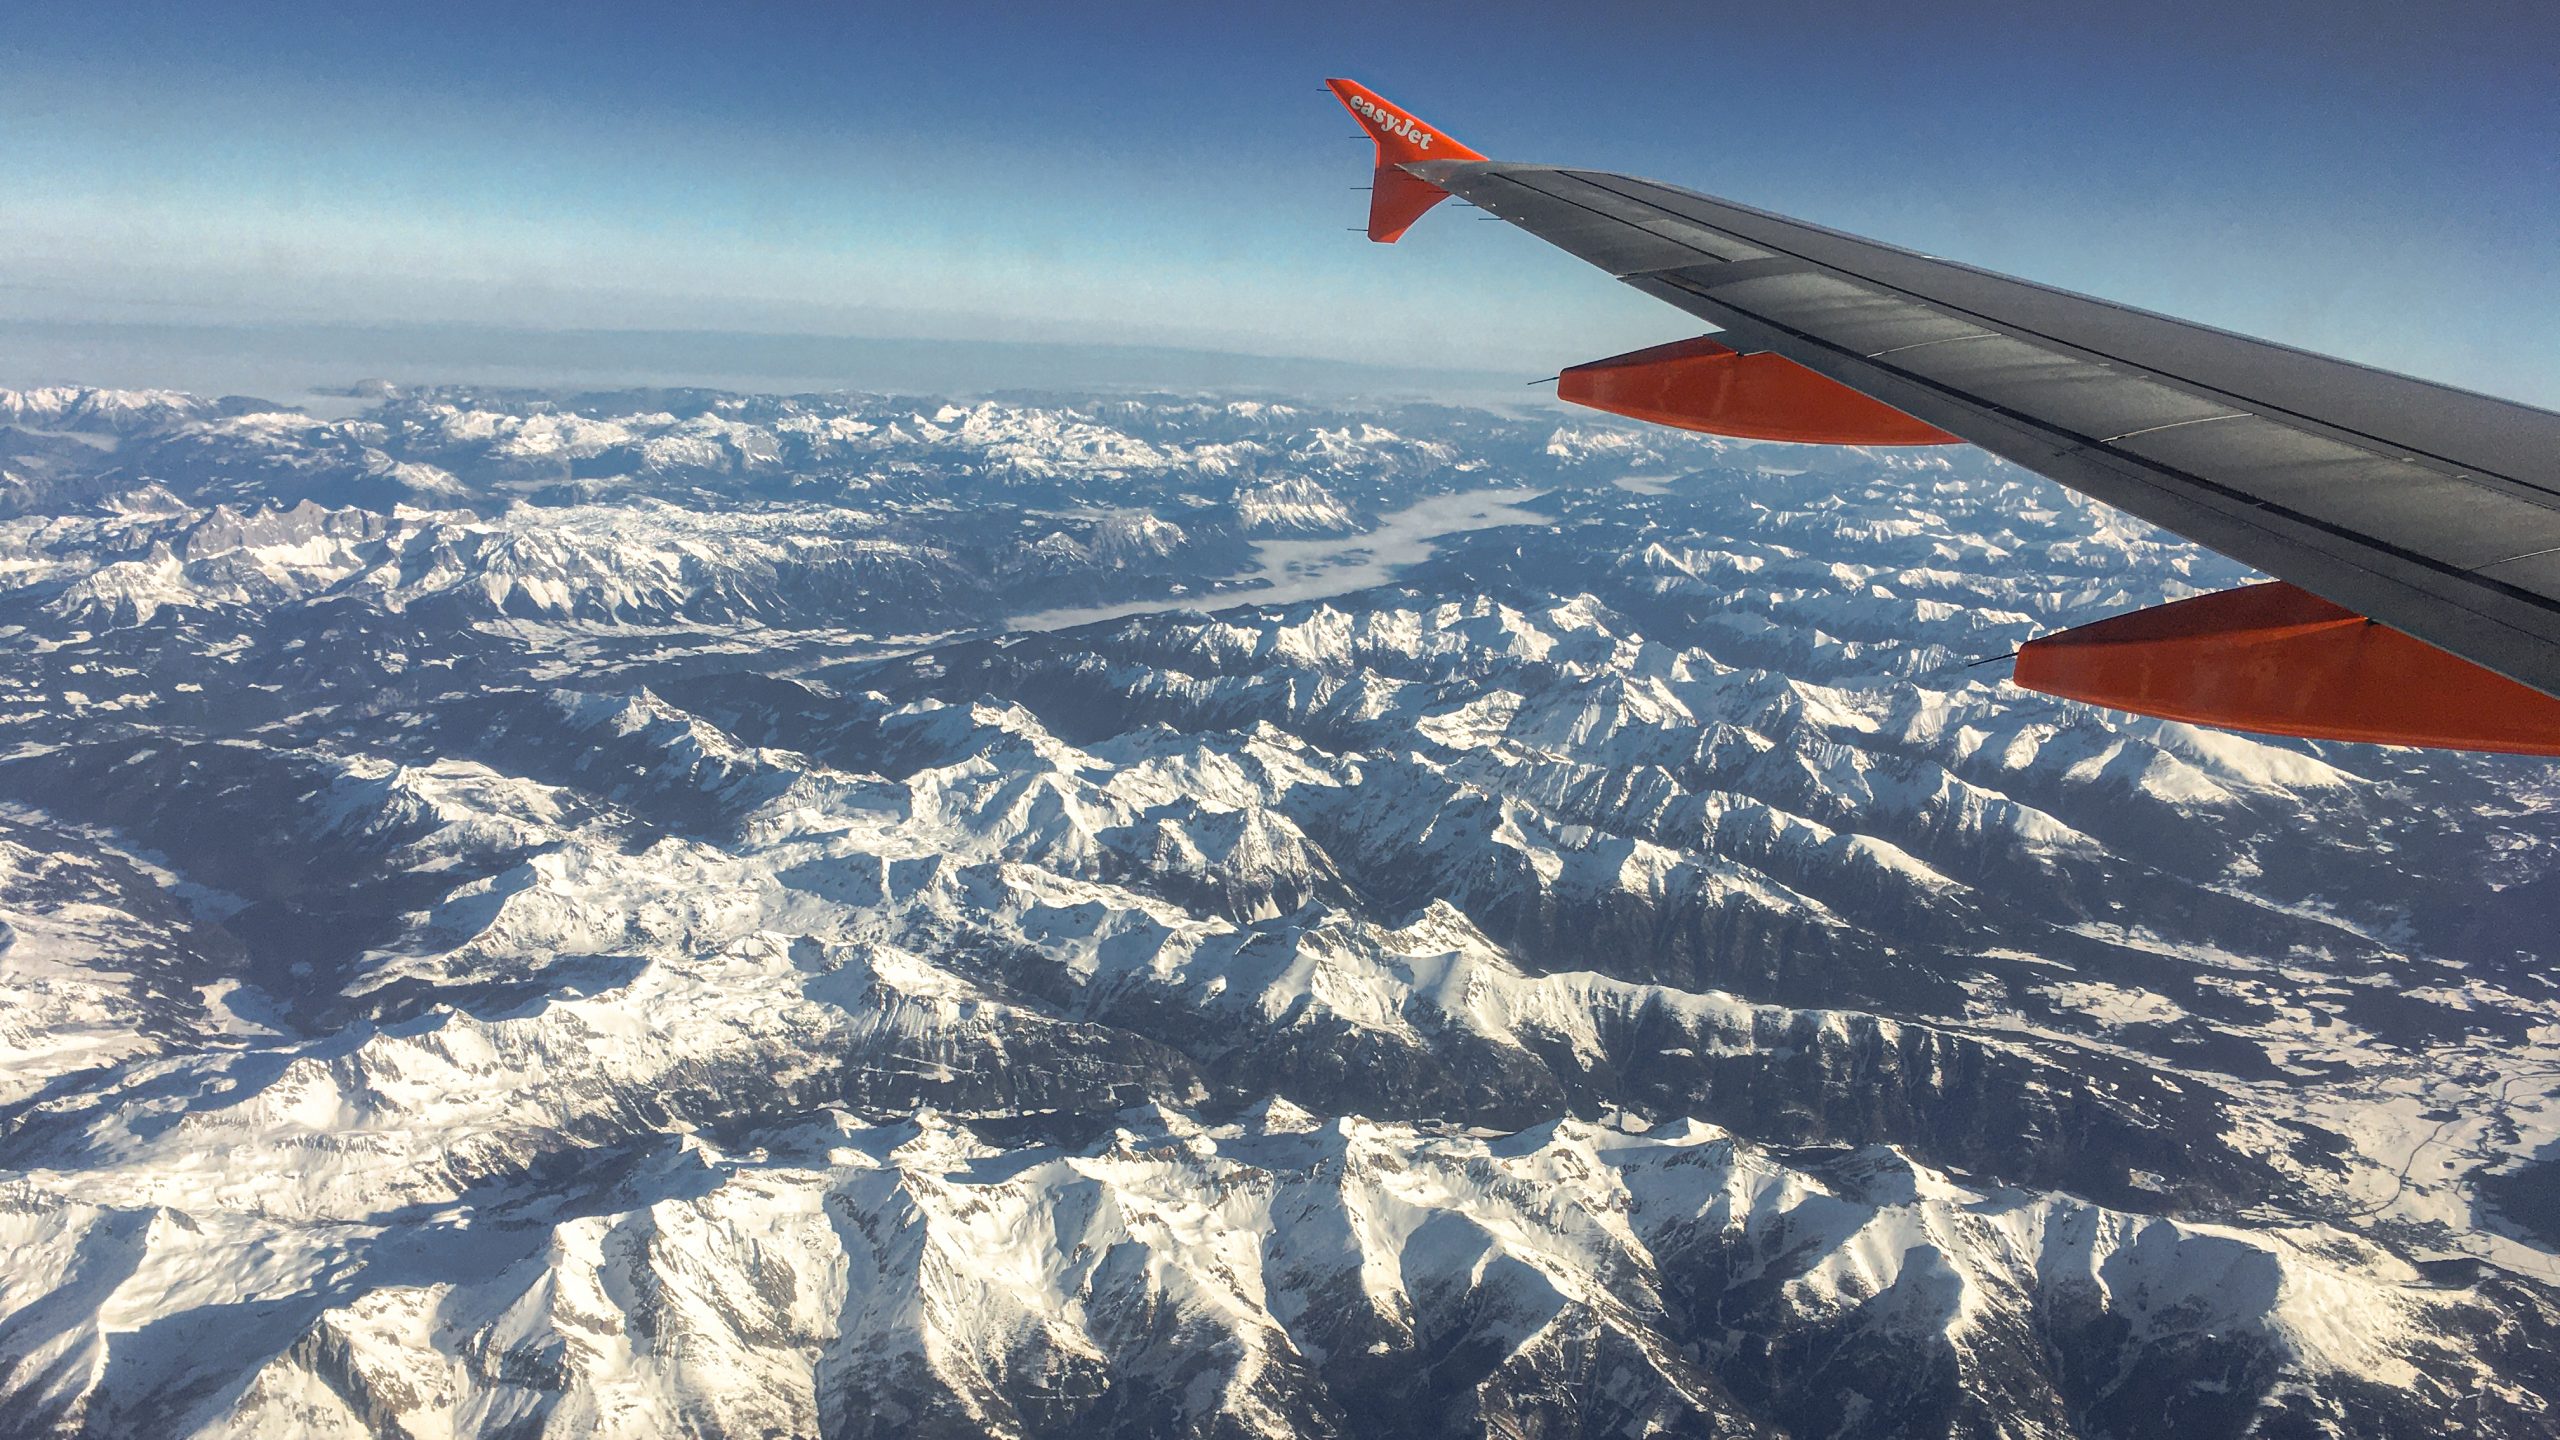 Snow-capped mountains as seen from the plan window seat